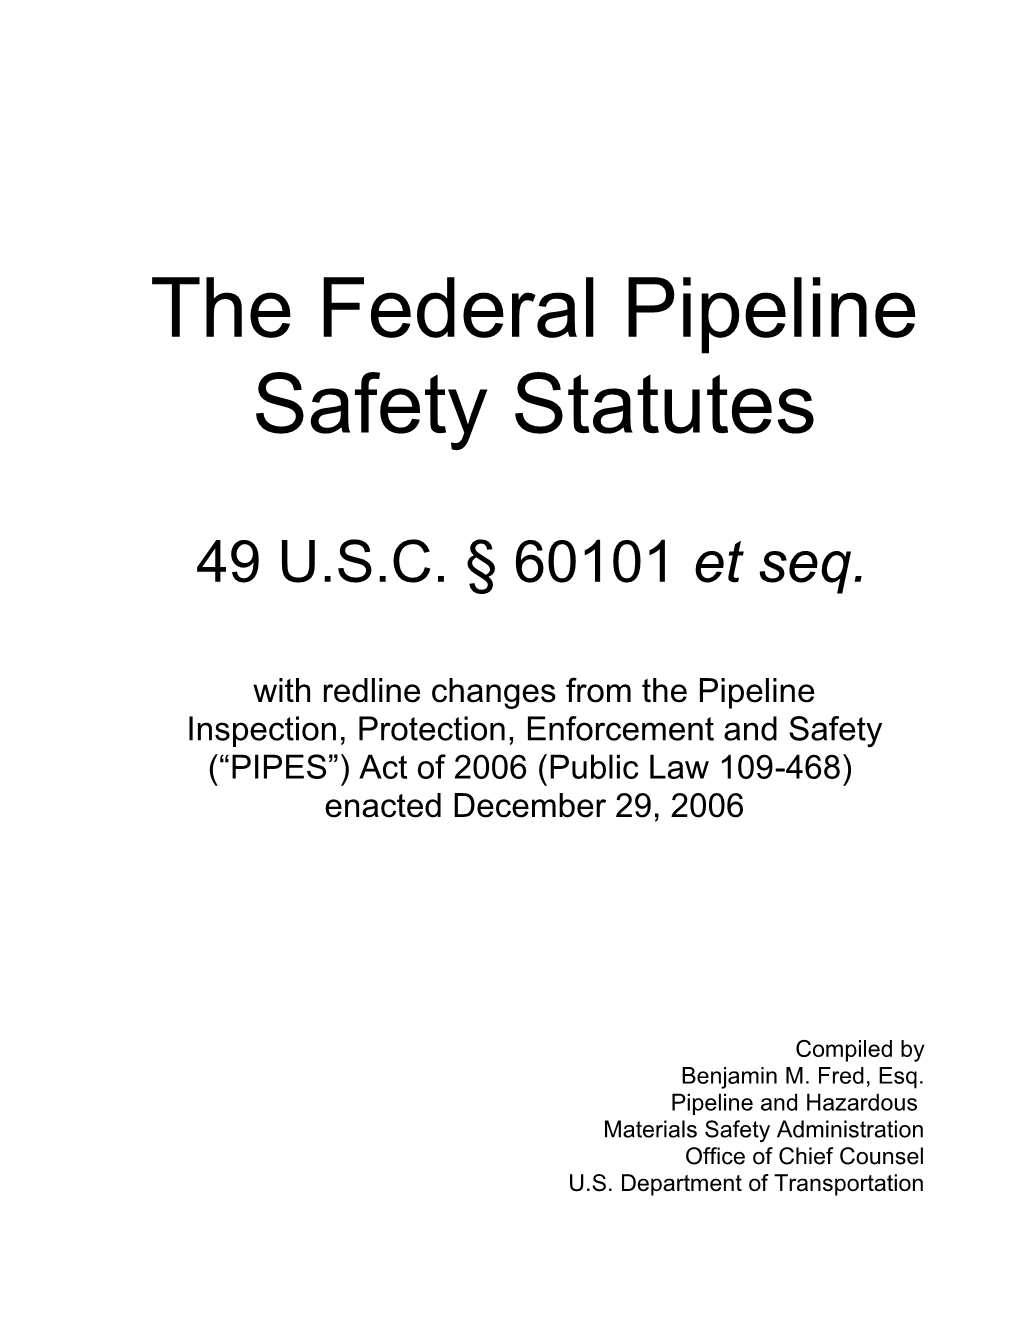 The Federal Pipeline Safety Statutes